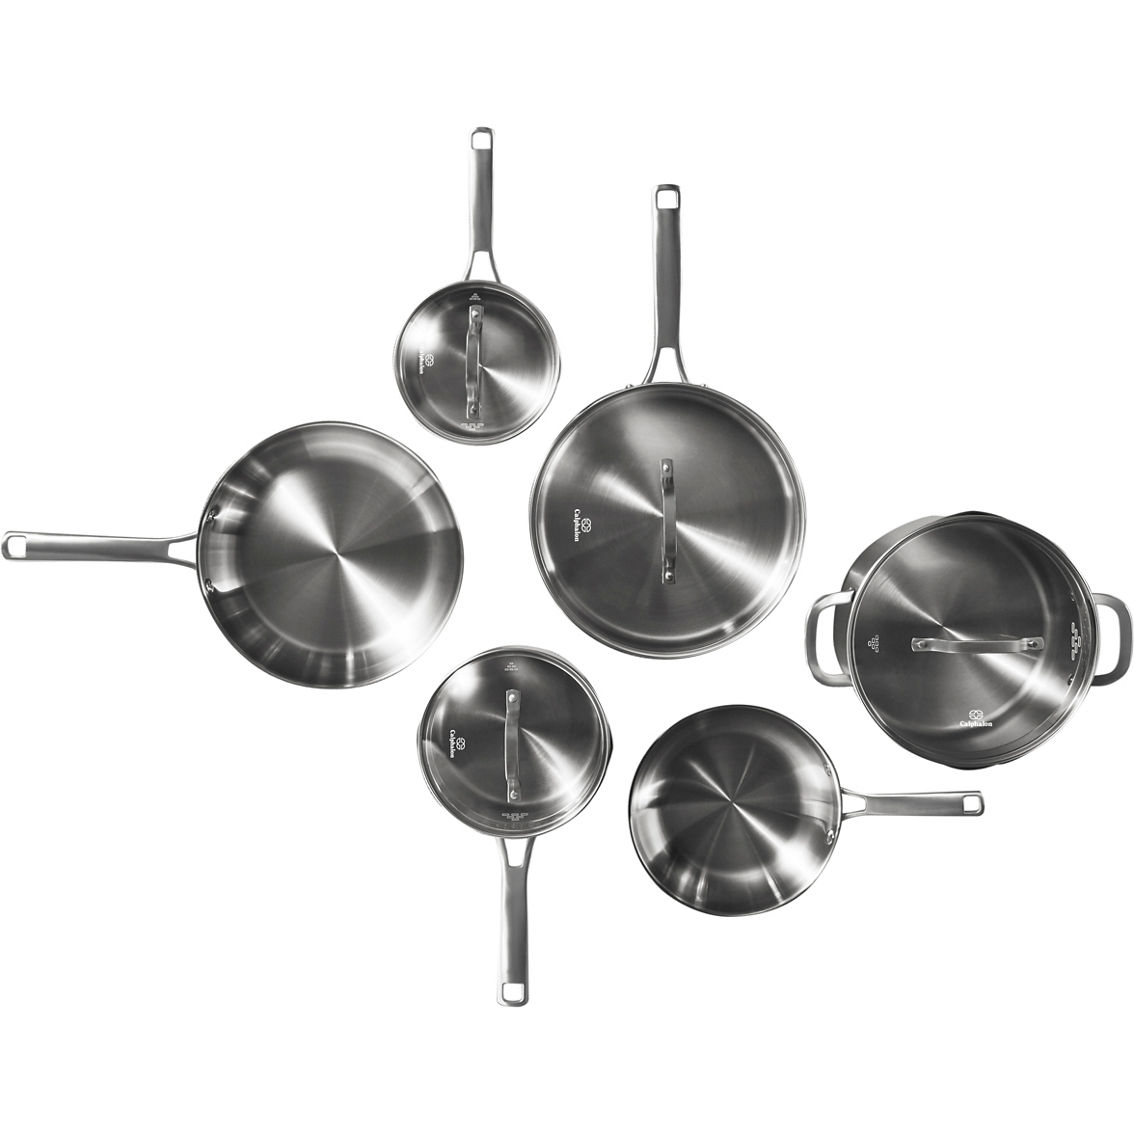 Calphalon 10-Piece Pots and Pans Set, Nonstick Kitchen Cookware with  Stay-Cool Stainless Steel Handles and Pour Spouts, Grey